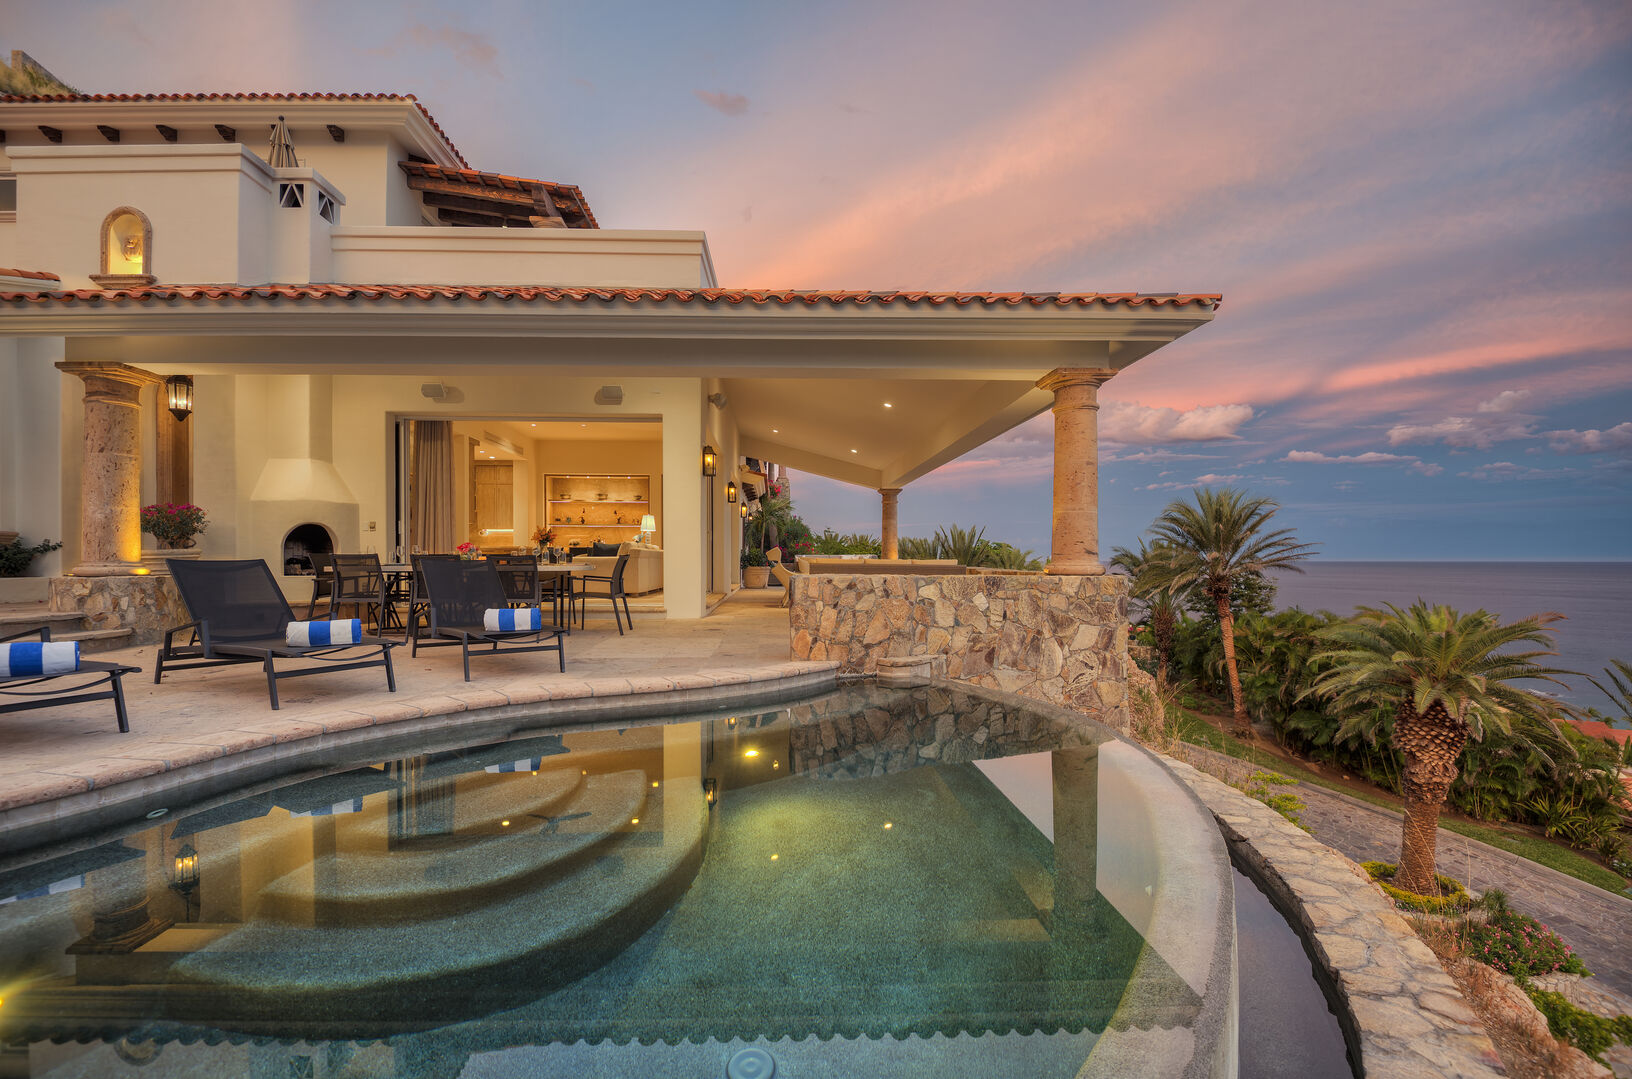 The exterior of this villa located in Los Cabos